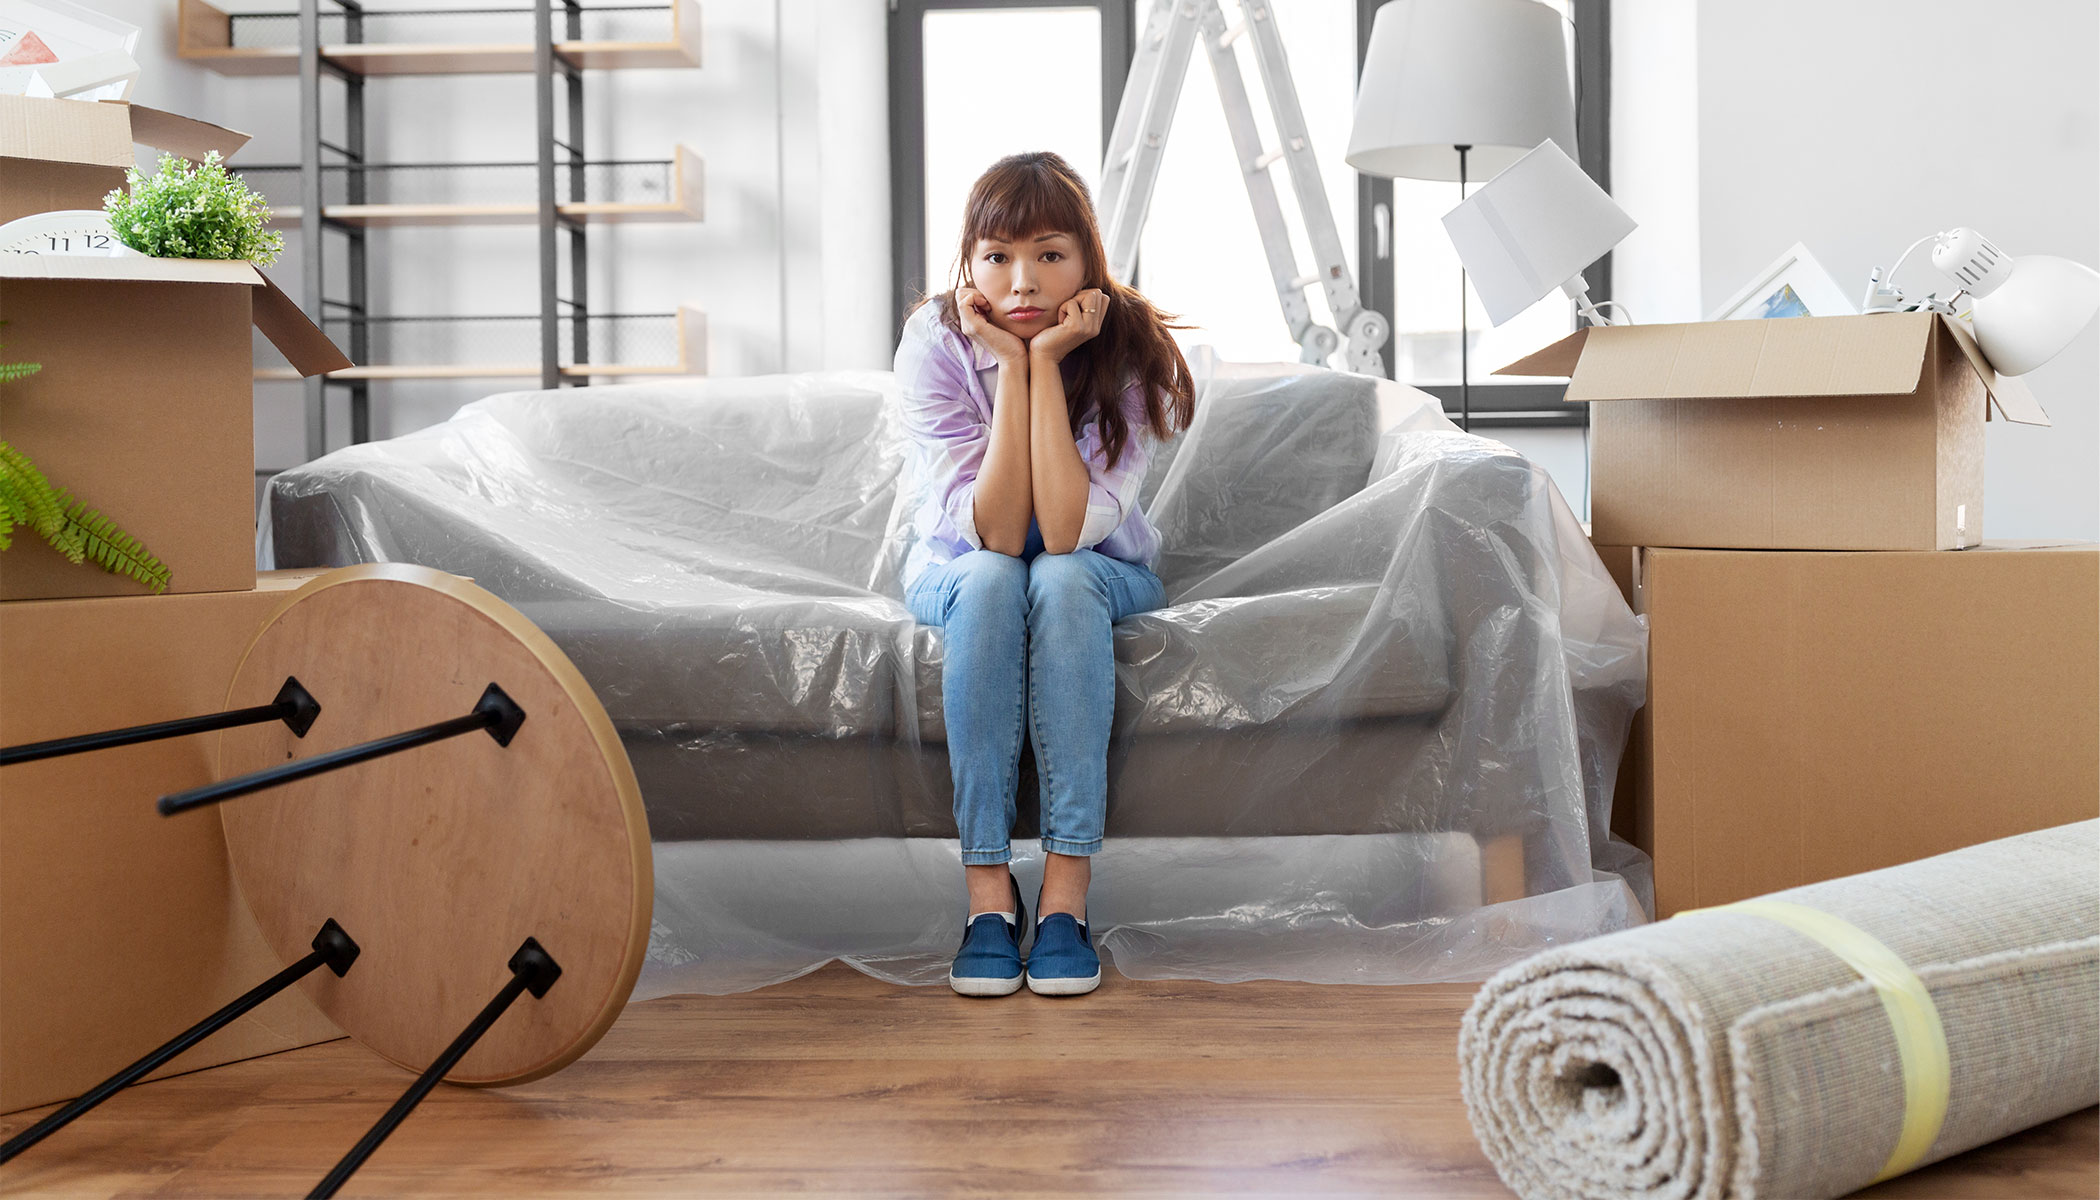 Woman feeling the stress of moving out after a breakup